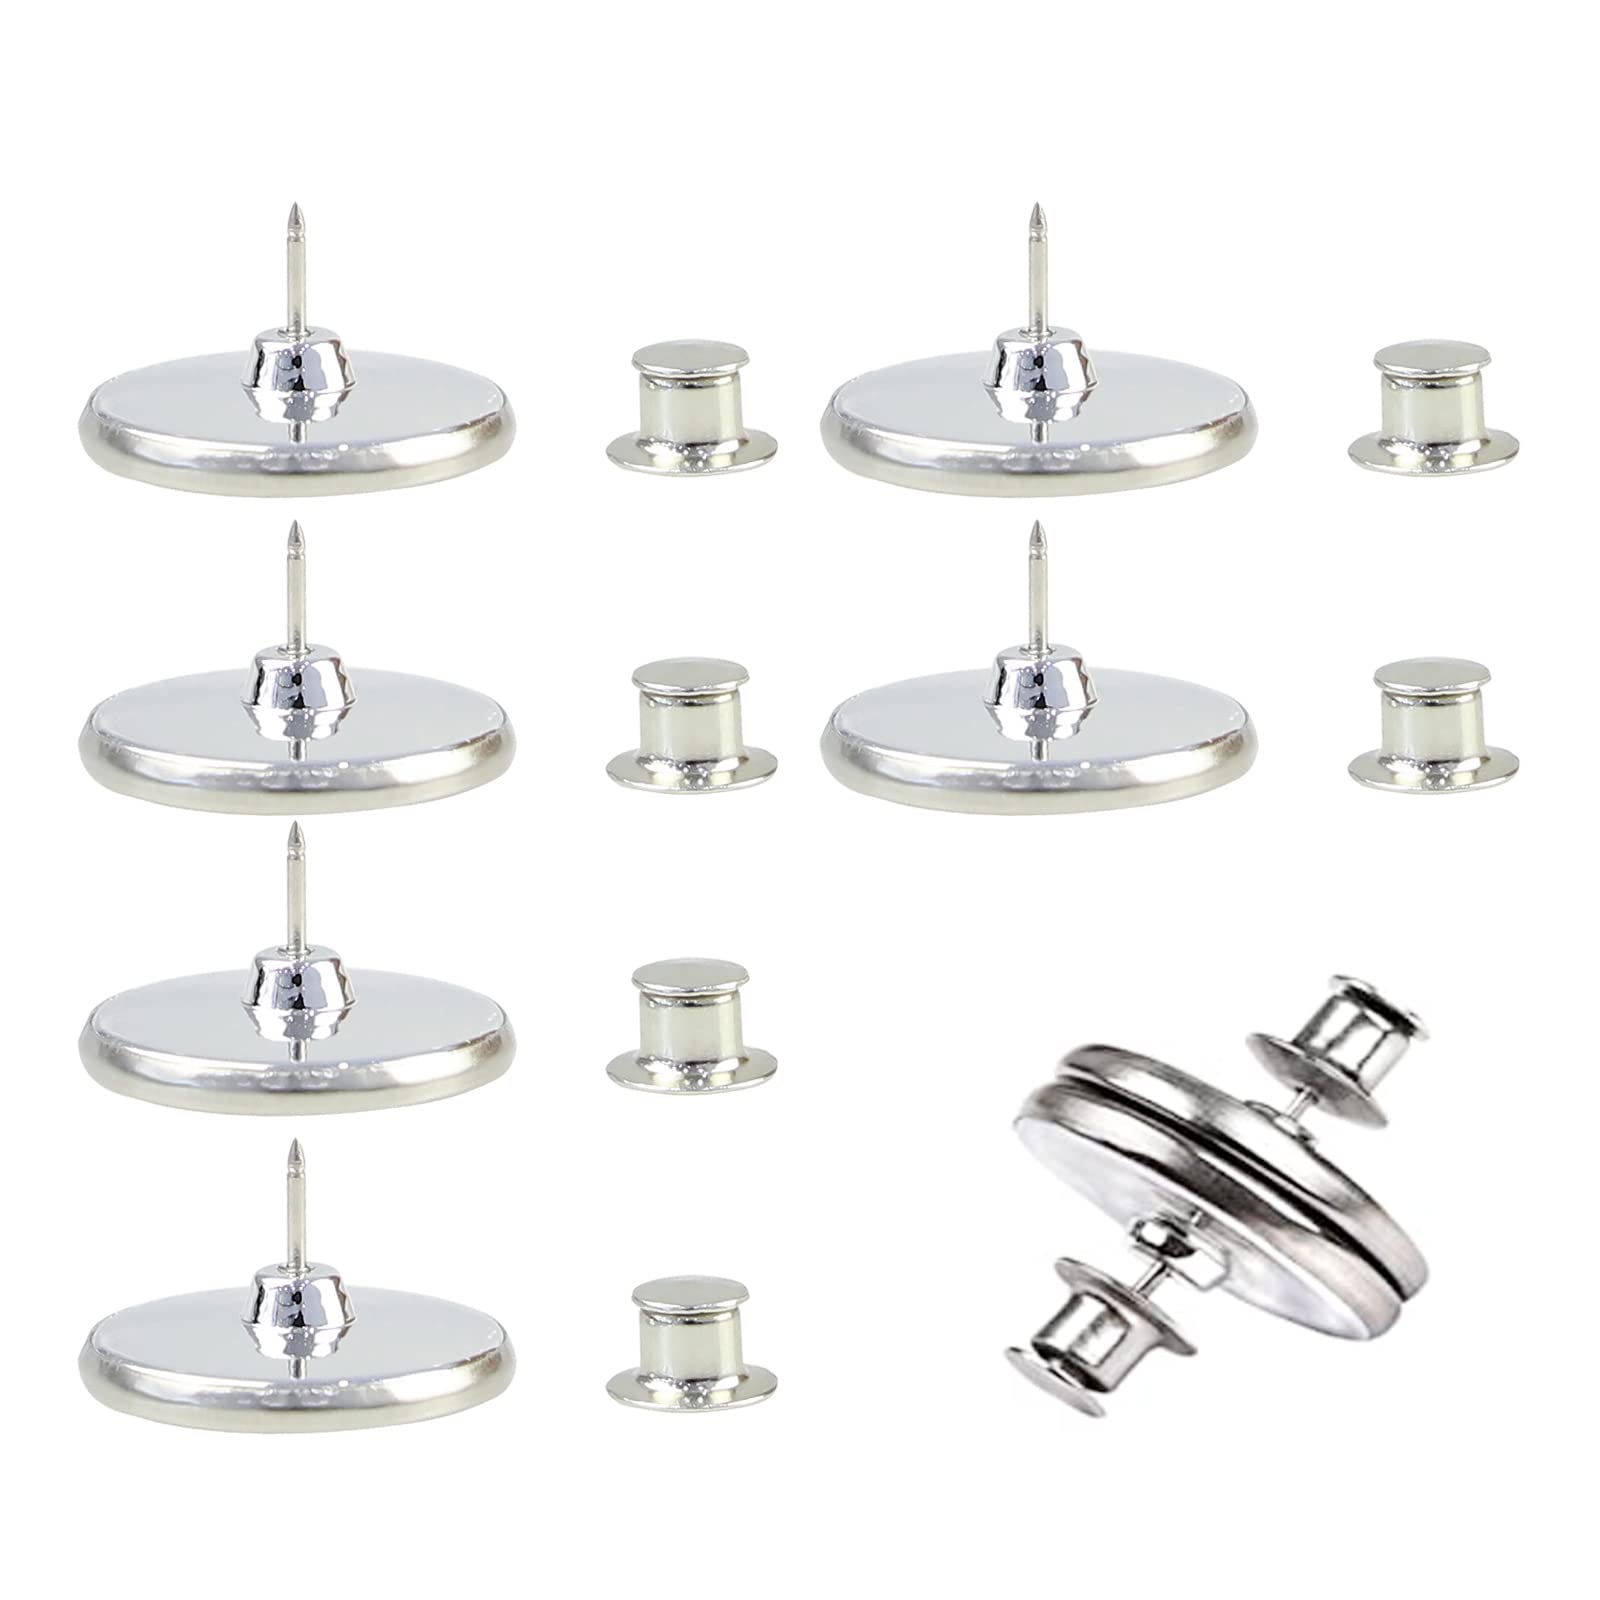 8 Pcs Curtain Magnets Closure for Drapes, Round Magnetic Curtain Clips Metal Holdback Button to Prevent Lights from Leaking, Detachable Drapery Weights Magnet with Back Tack for Home Bedroom Draperies